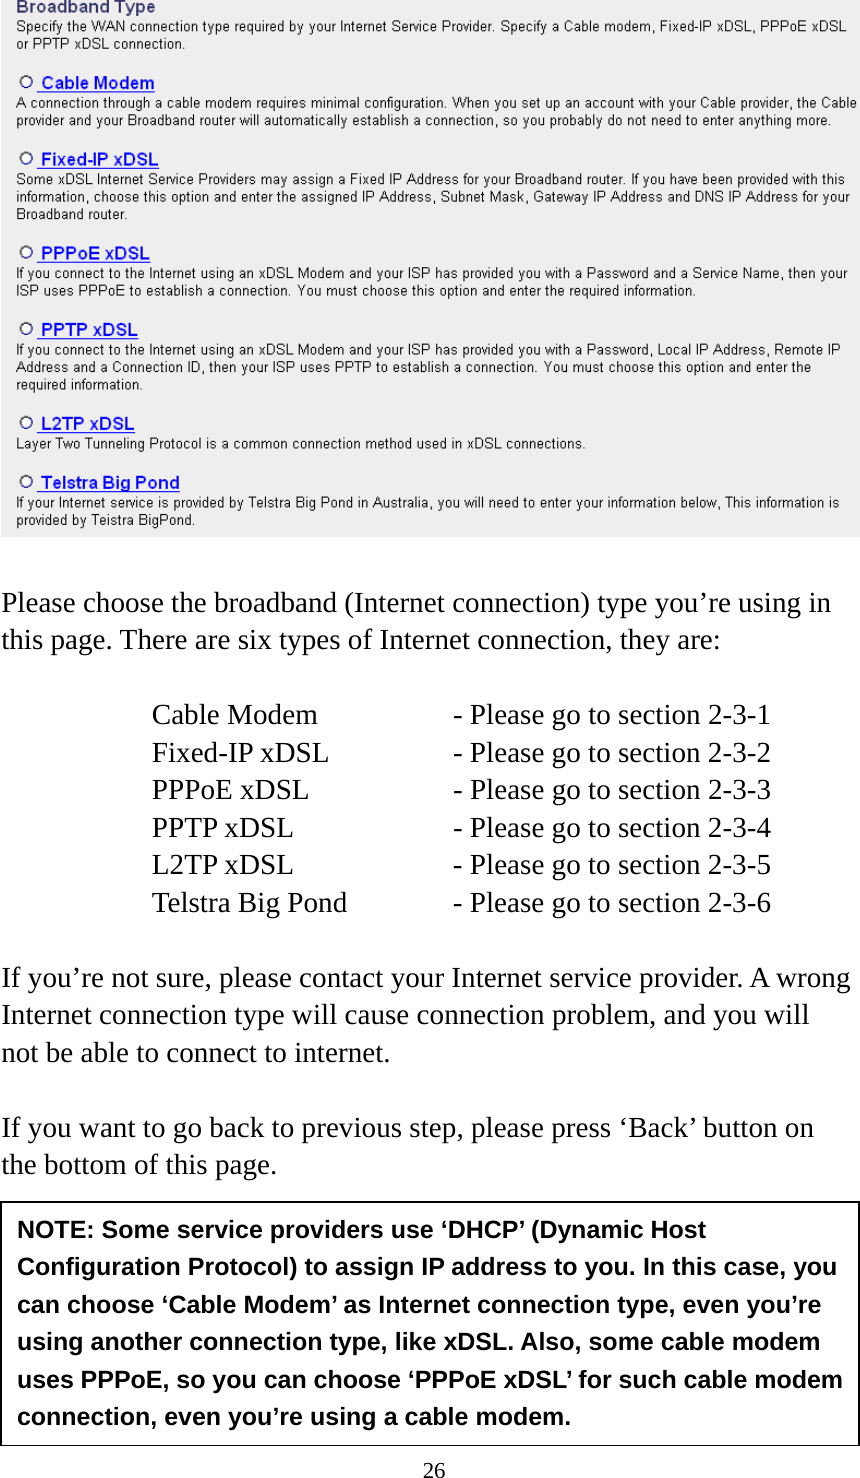 26  Please choose the broadband (Internet connection) type you’re using in this page. There are six types of Internet connection, they are:  Cable Modem      - Please go to section 2-3-1 Fixed-IP xDSL      - Please go to section 2-3-2 PPPoE xDSL      - Please go to section 2-3-3 PPTP xDSL       - Please go to section 2-3-4 L2TP xDSL       - Please go to section 2-3-5 Telstra Big Pond     - Please go to section 2-3-6  If you’re not sure, please contact your Internet service provider. A wrong Internet connection type will cause connection problem, and you will not be able to connect to internet.  If you want to go back to previous step, please press ‘Back’ button on the bottom of this page.      2-3-1 Setup procedure for ‘Cable Modem’: NOTE: Some service providers use ‘DHCP’ (Dynamic Host Configuration Protocol) to assign IP address to you. In this case, you can choose ‘Cable Modem’ as Internet connection type, even you’re using another connection type, like xDSL. Also, some cable modem uses PPPoE, so you can choose ‘PPPoE xDSL’ for such cable modem connection, even you’re using a cable modem. 